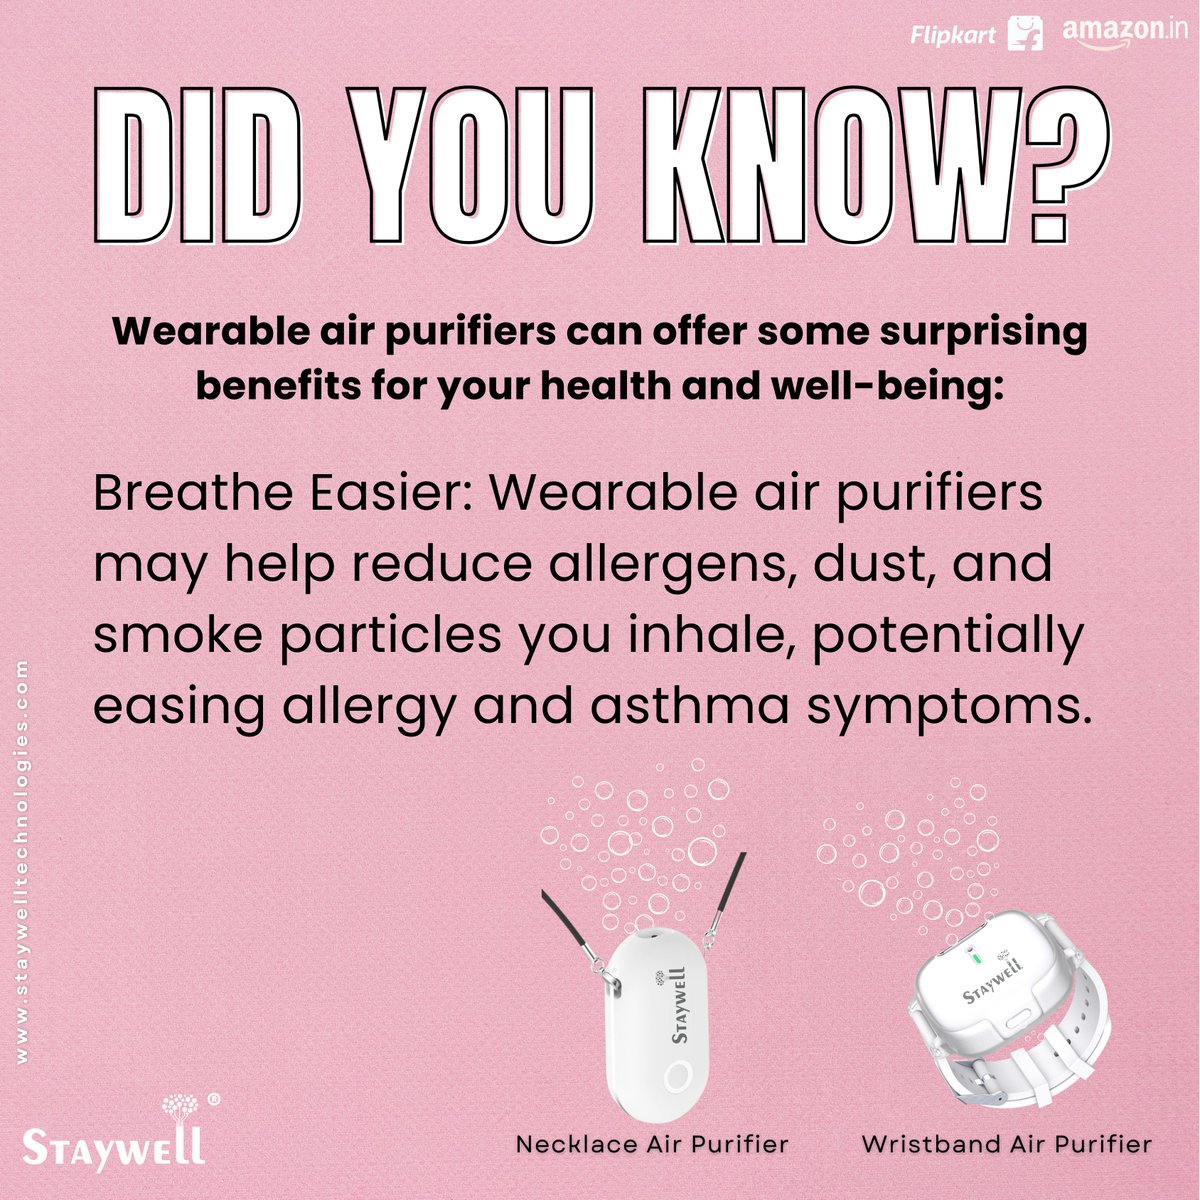 DID YOU KNOW?
Wearable air purifiers can offer some surprising benefits for your health and well-being.
#AirPollution #AirPurifier #AirYouCanWear #Staywell #StaywellTechnologies 
Find the Necklace Air Purifier on Flipkart 📿🍃: [Link](bit.ly/Flipkart-Neckl…)

Discover the